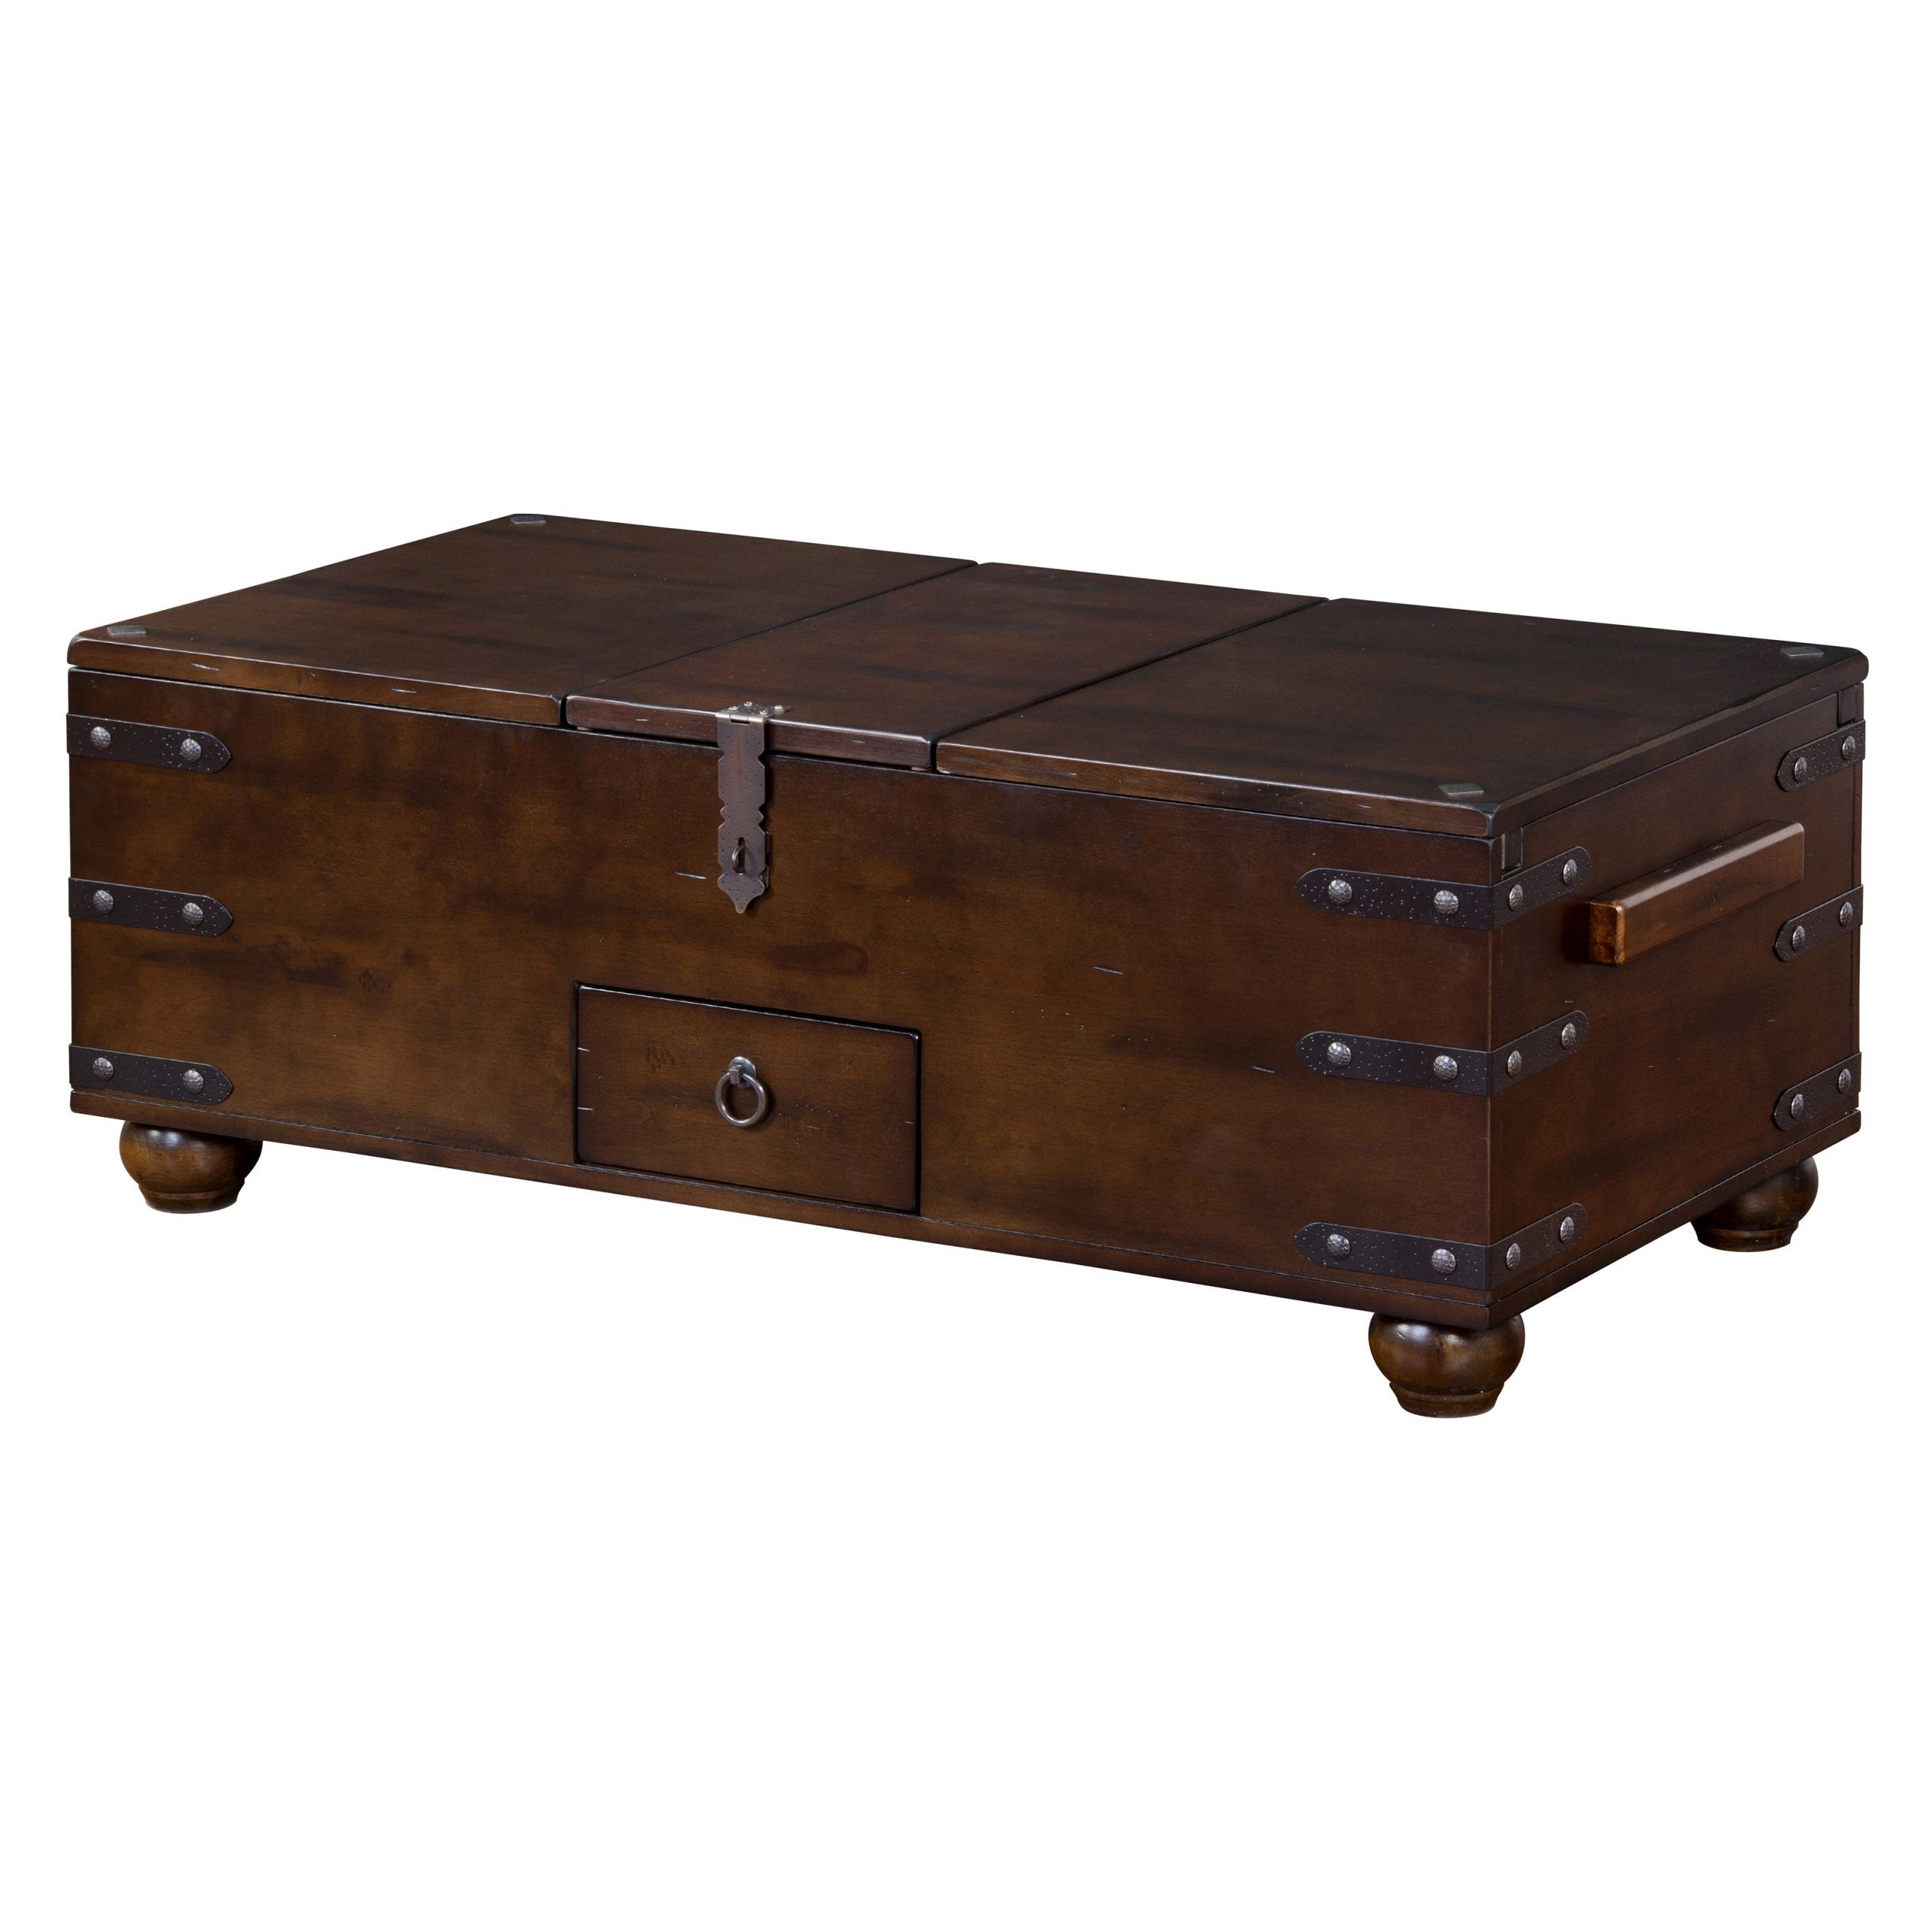 Sunny Designs Santa Fe Trunk Coffee Table – Coffee Tables Throughout Espresso Wood Trunk Cocktail Tables (View 13 of 15)